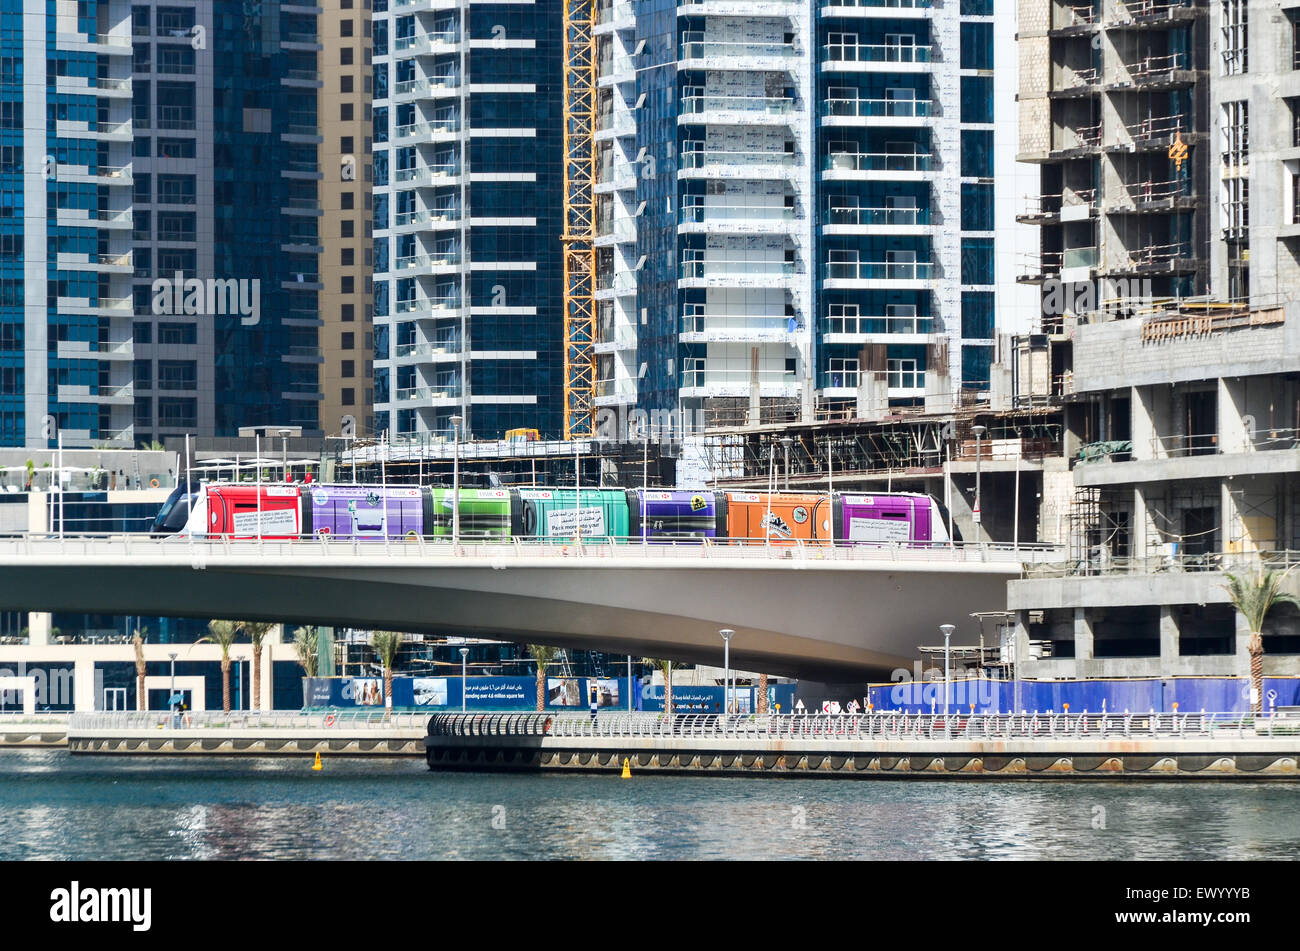 Tramway on a bridge among high rise buildings, towers and hotels of the Dubai Marina, United Arab Emirates Stock Photo